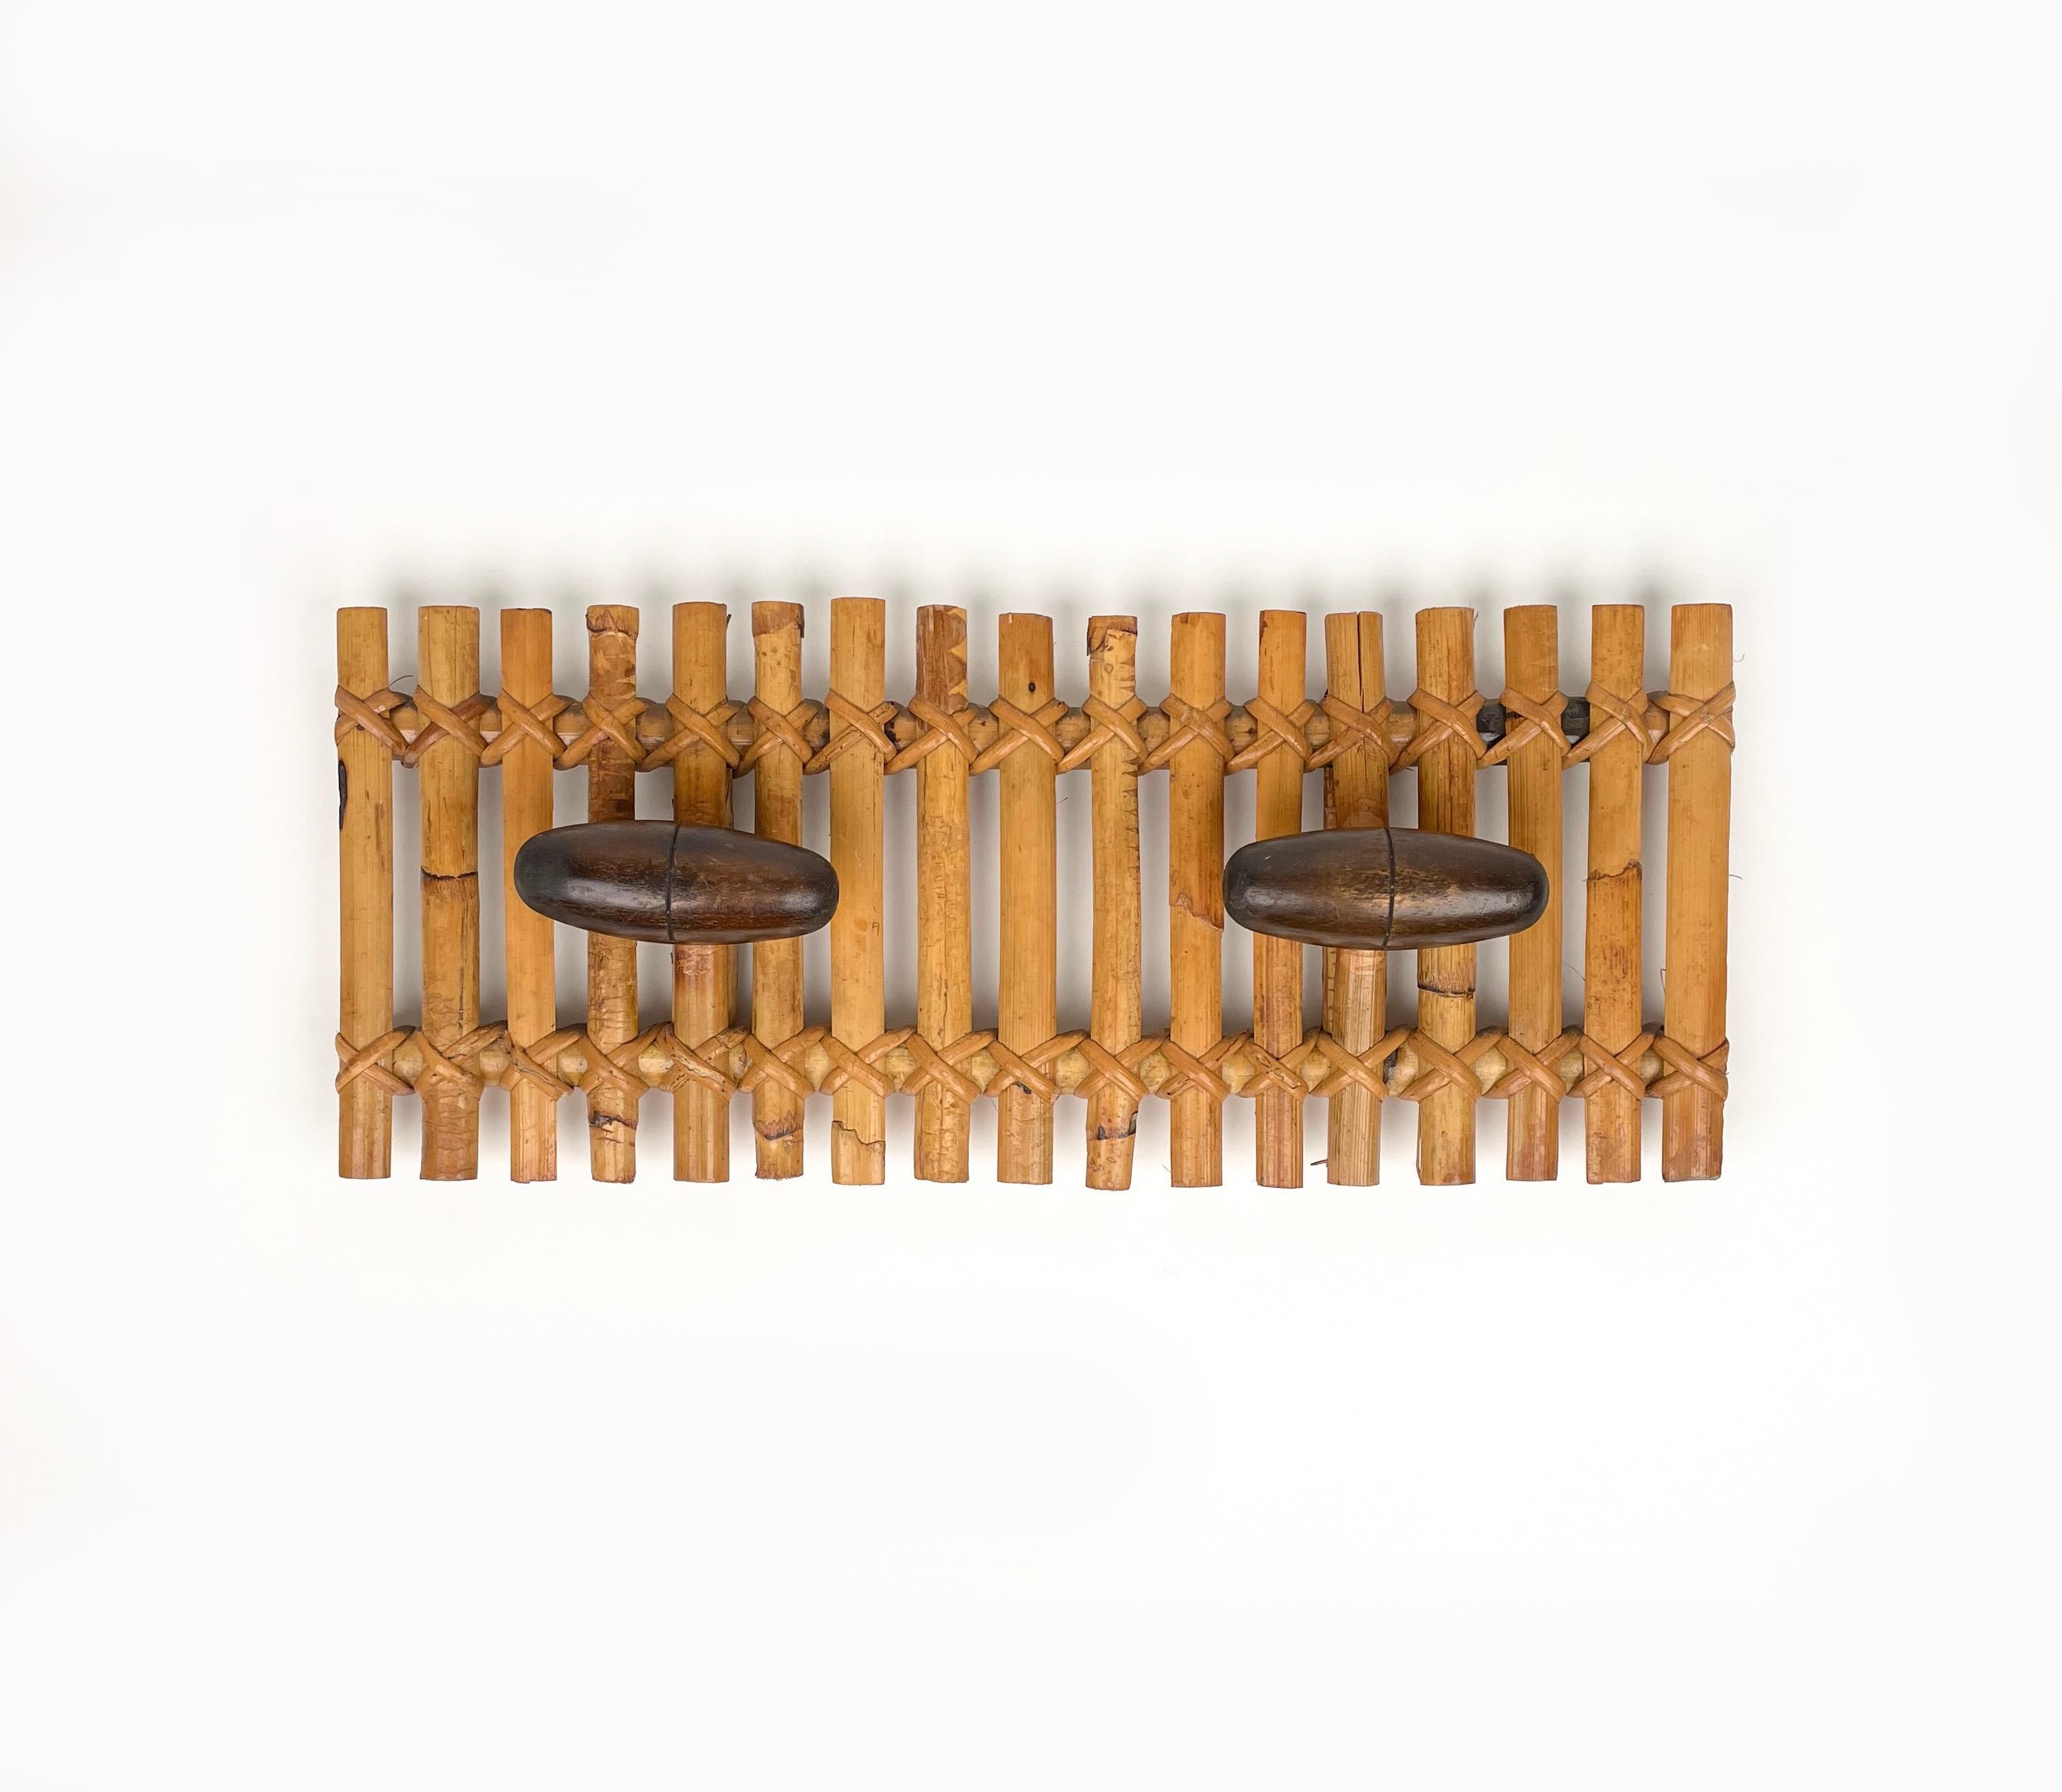 Two-hooks coat hanger in bamboo and rattan attributed to the designer Olaf von Bohr. 

Made in Italy in the 1960s.